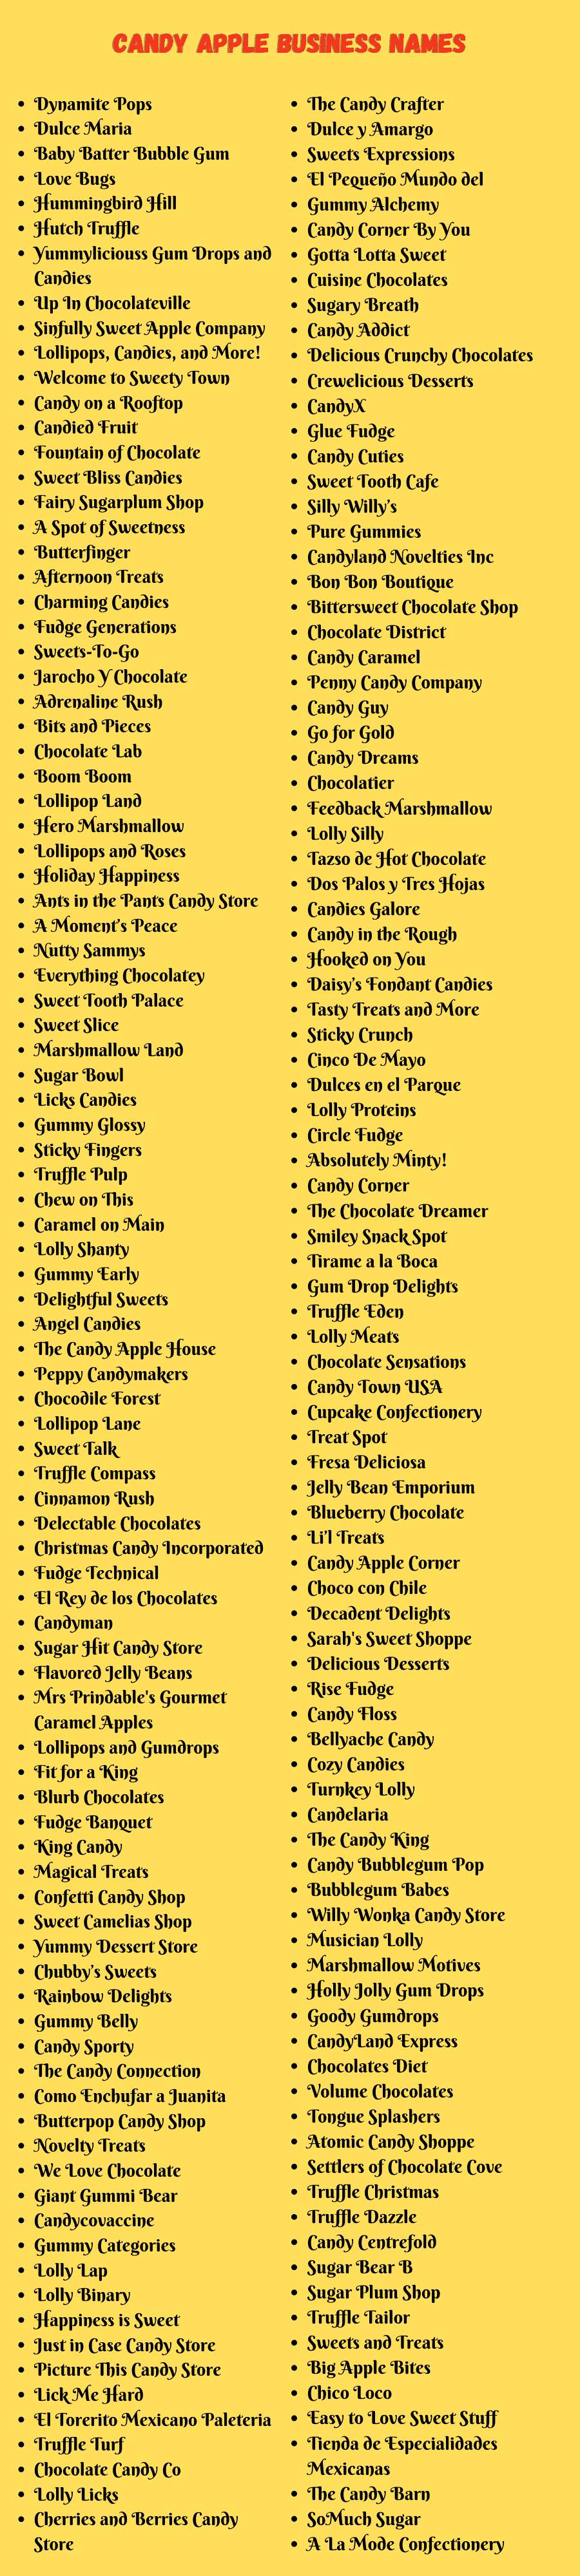 Candy Apple Business Names